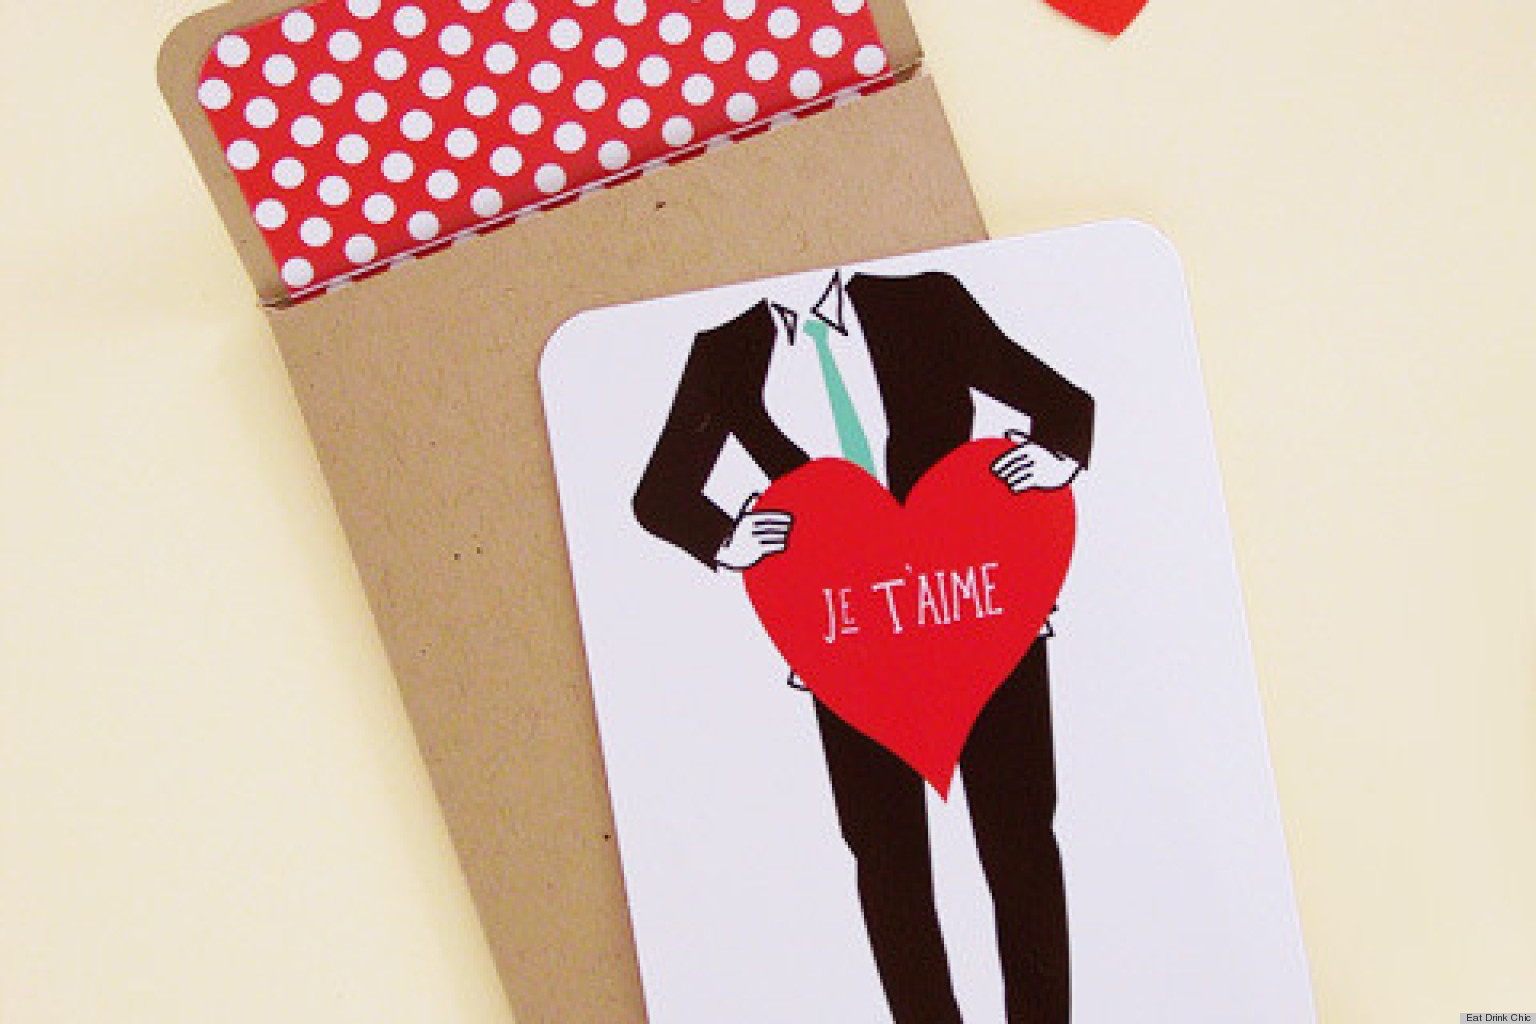 20 Free Printable Valentine's Day Cards To Send Last-Minute Greetings